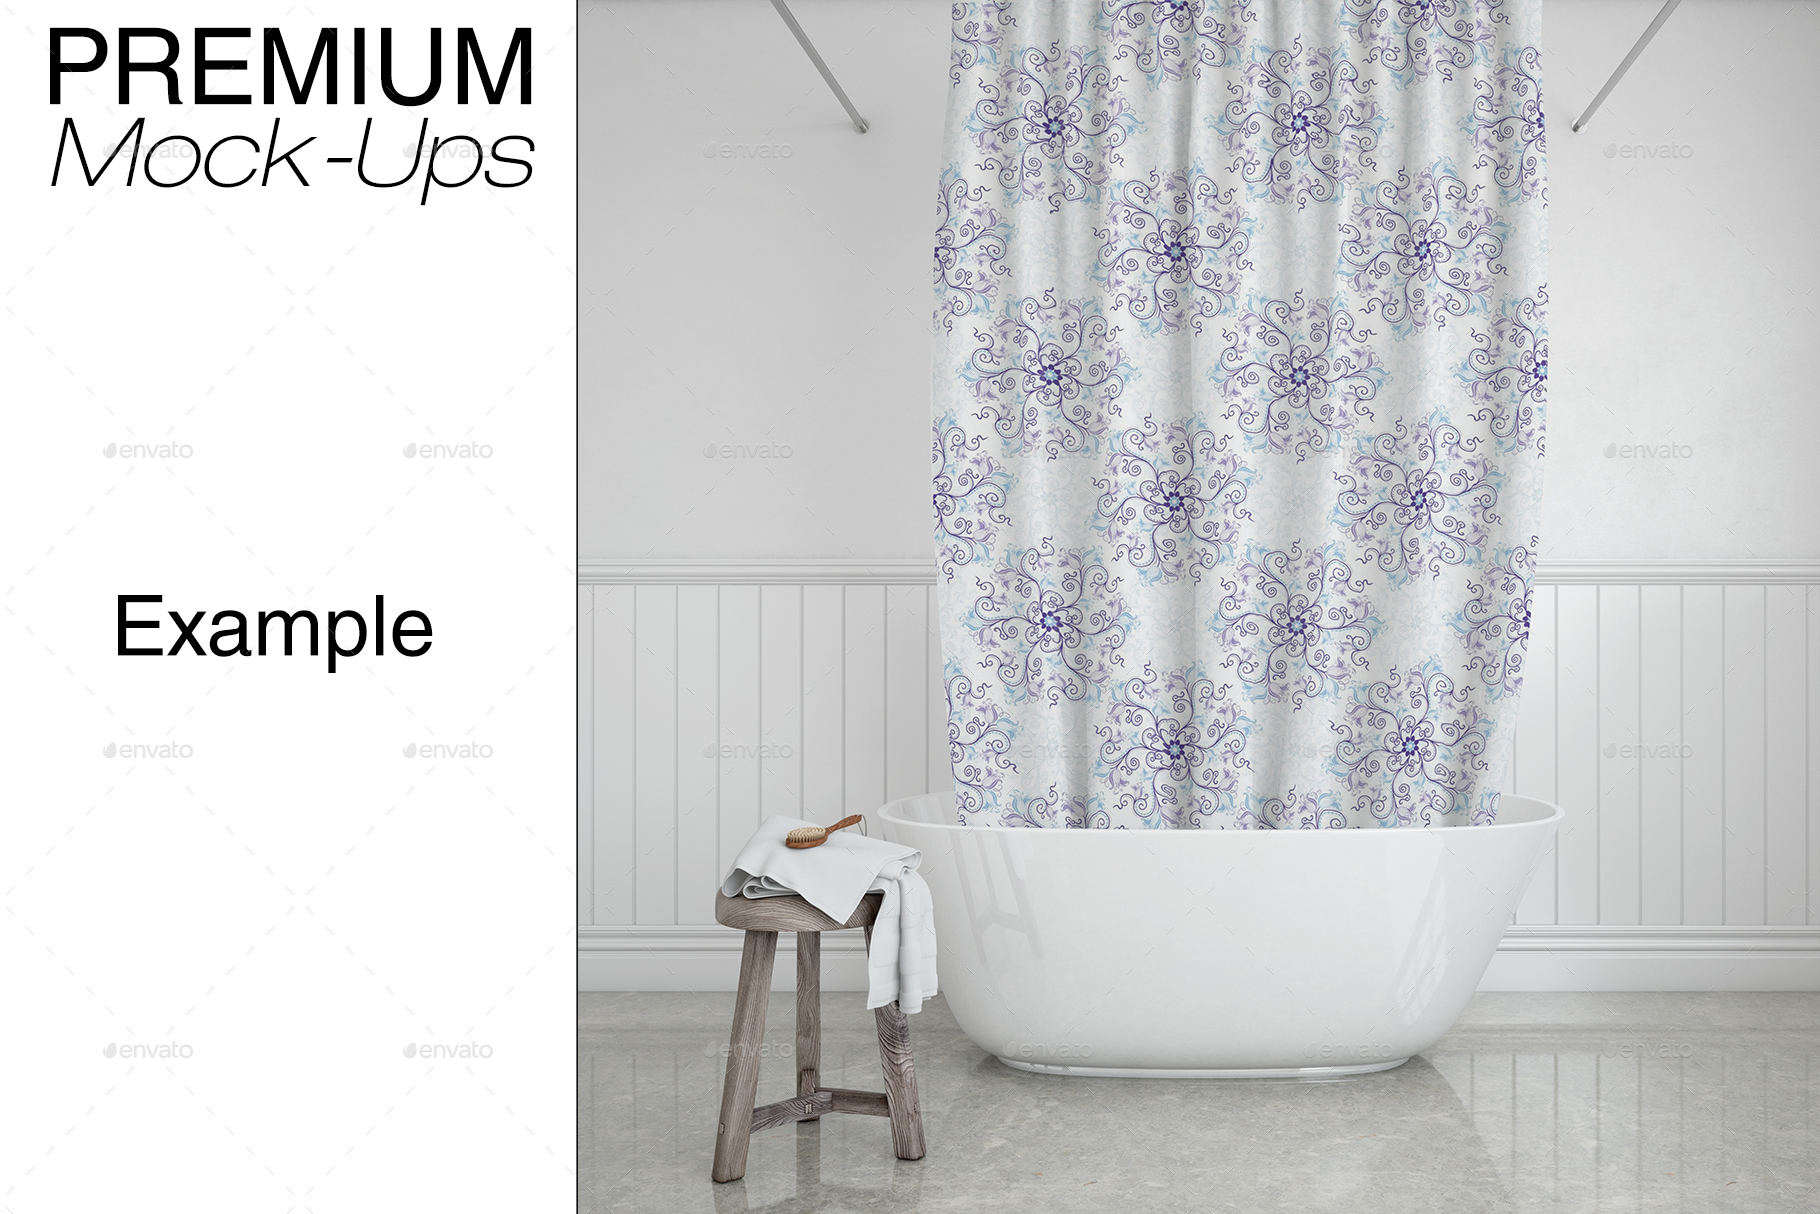 Download Bath Curtain Mockup Pack by mock-ups | GraphicRiver